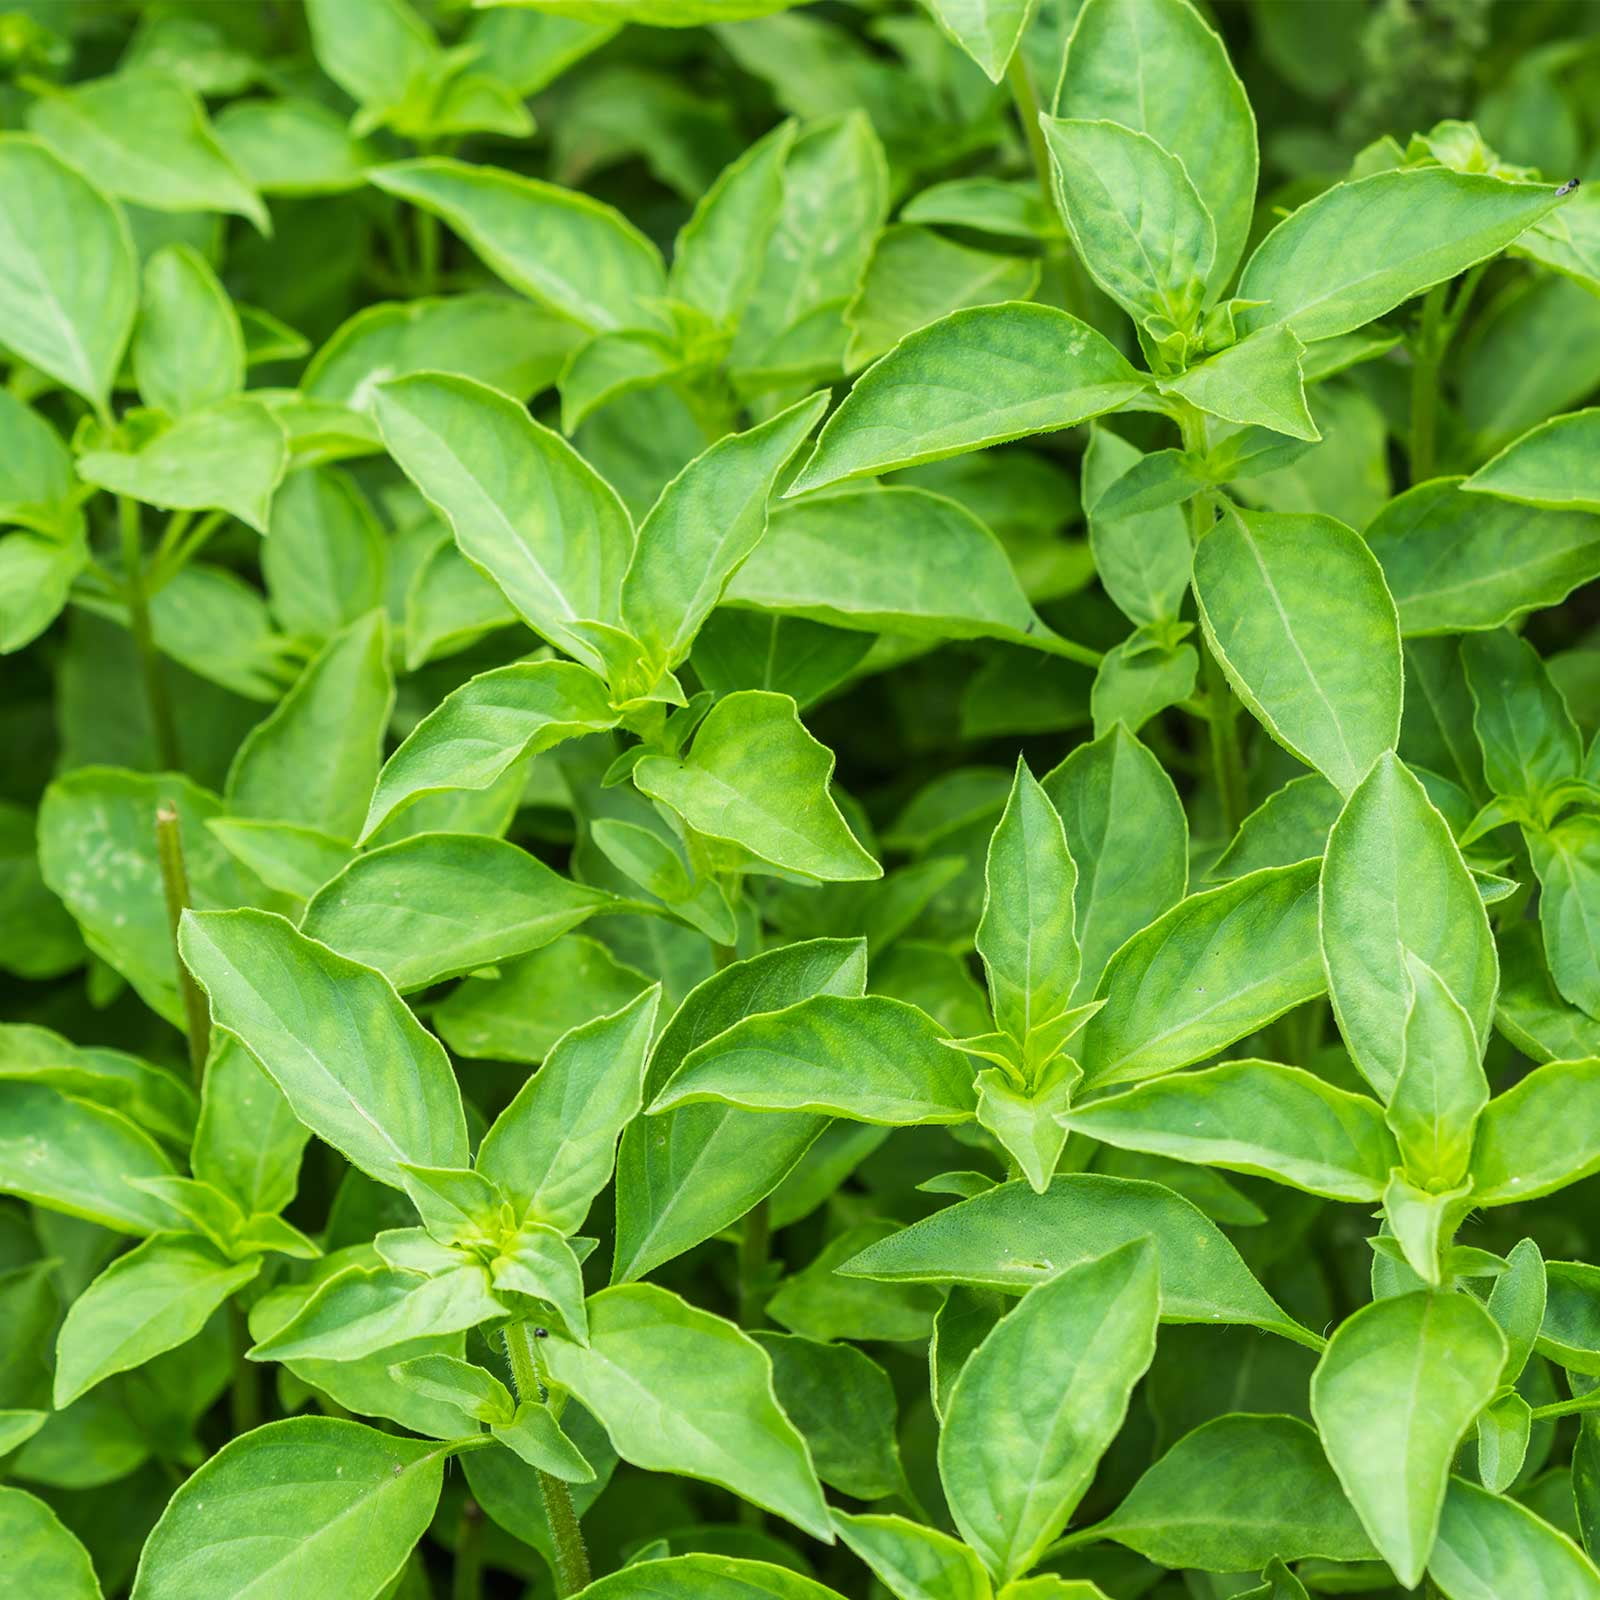 Live Lemon Basil Herb Plant Sprout Organic Healthy Fragrant All-Natural Live Thriving Sturdy Herb for Gardening and Planting Beautiful